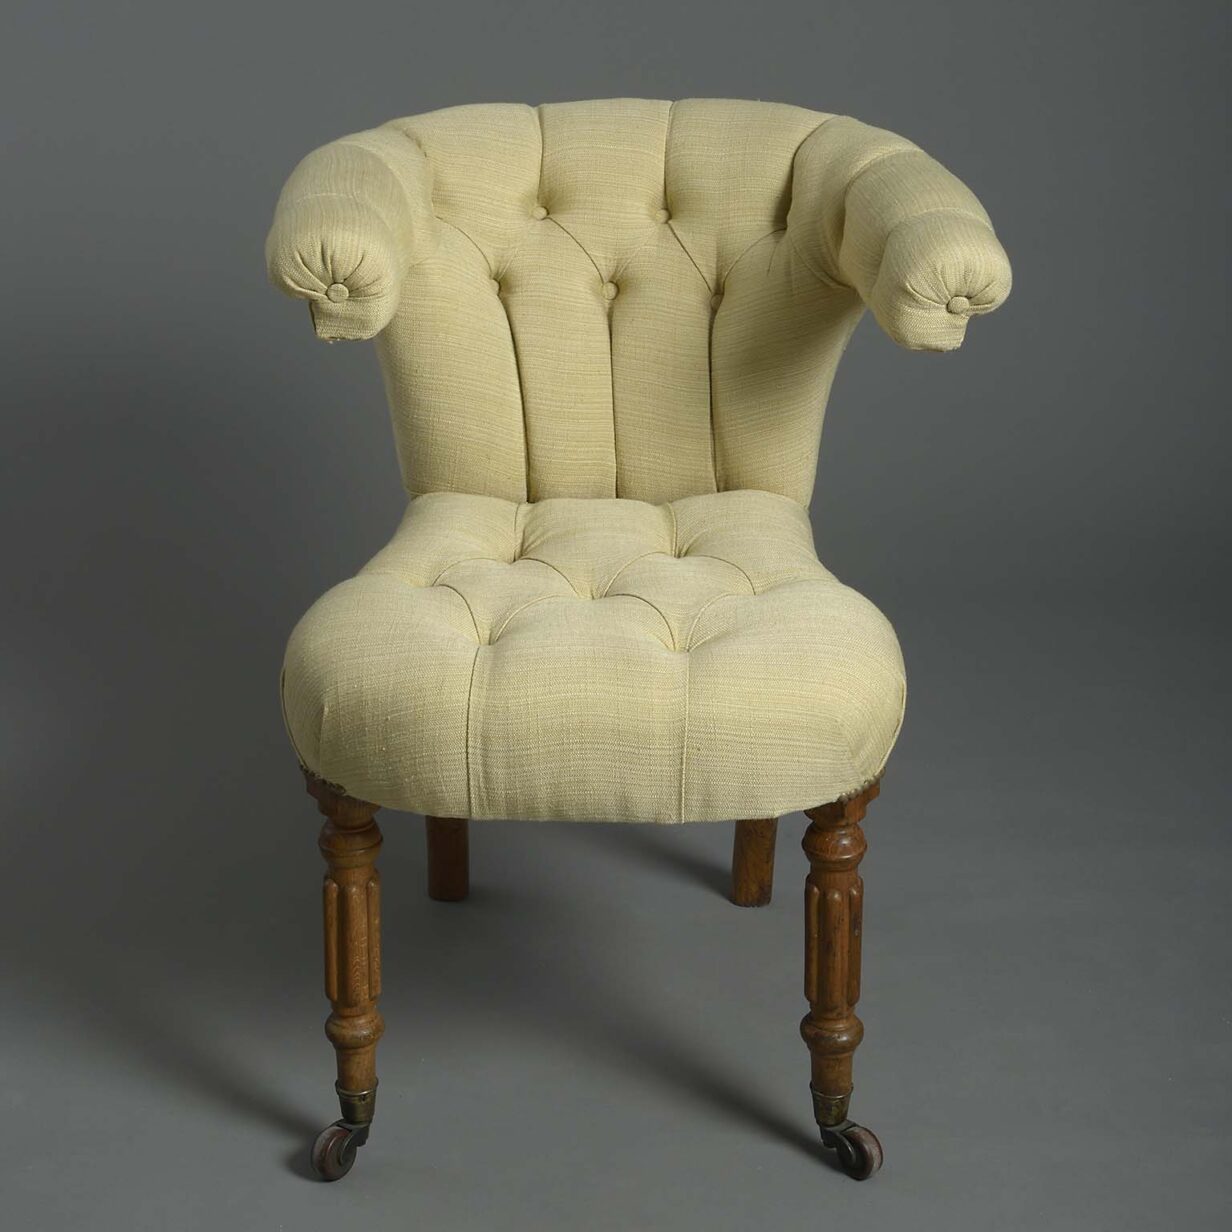 Early 19th century upholstered reading armchair